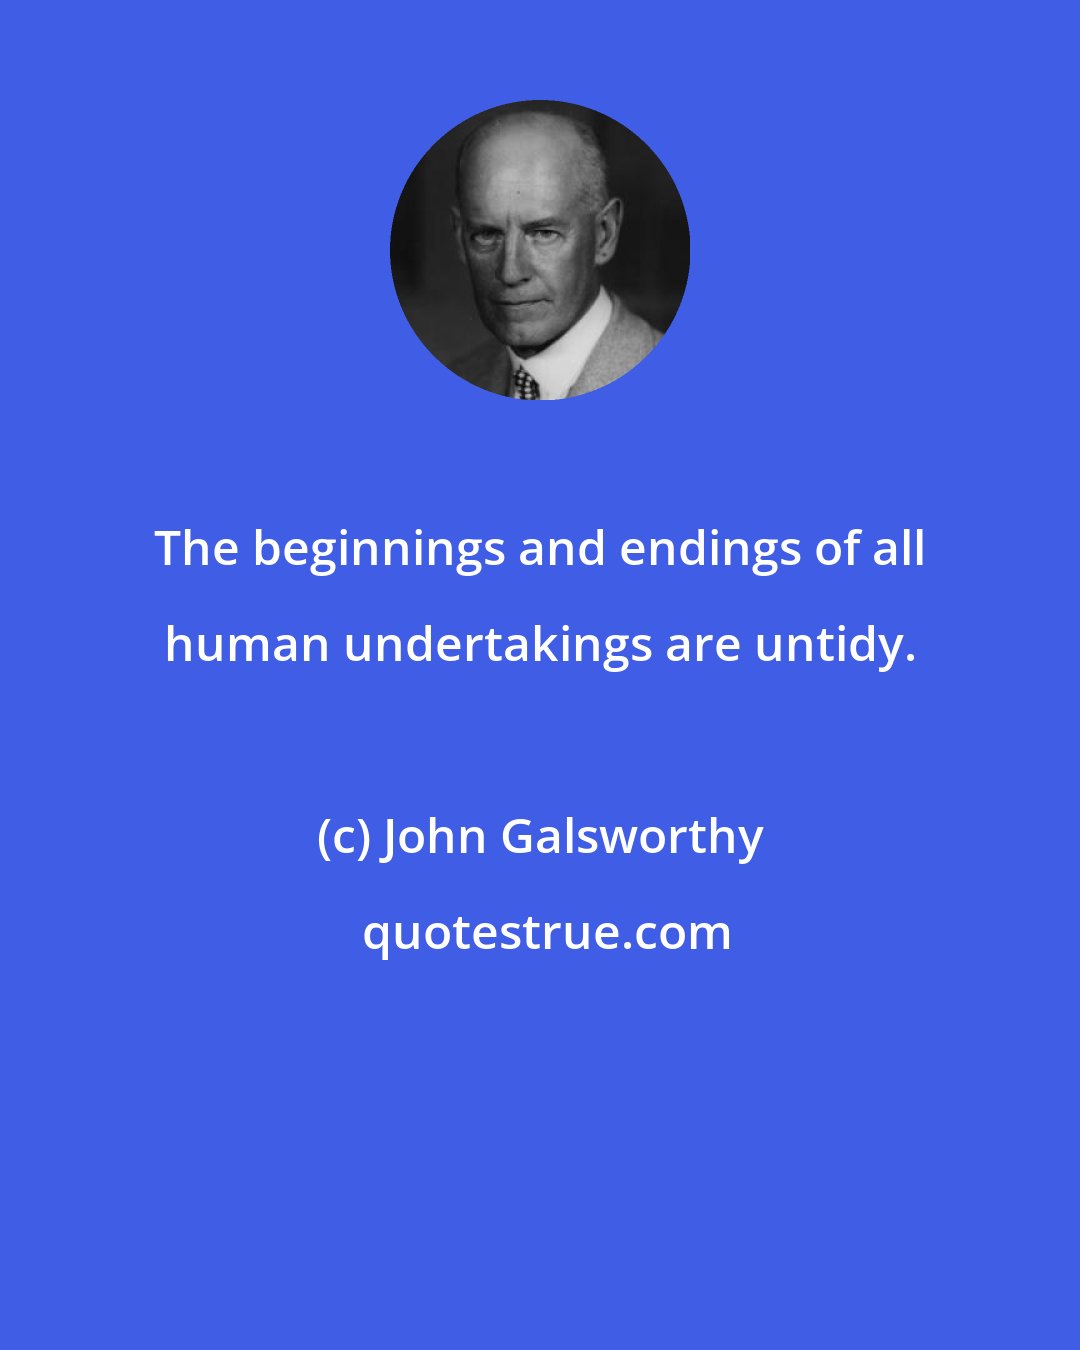 John Galsworthy: The beginnings and endings of all human undertakings are untidy.